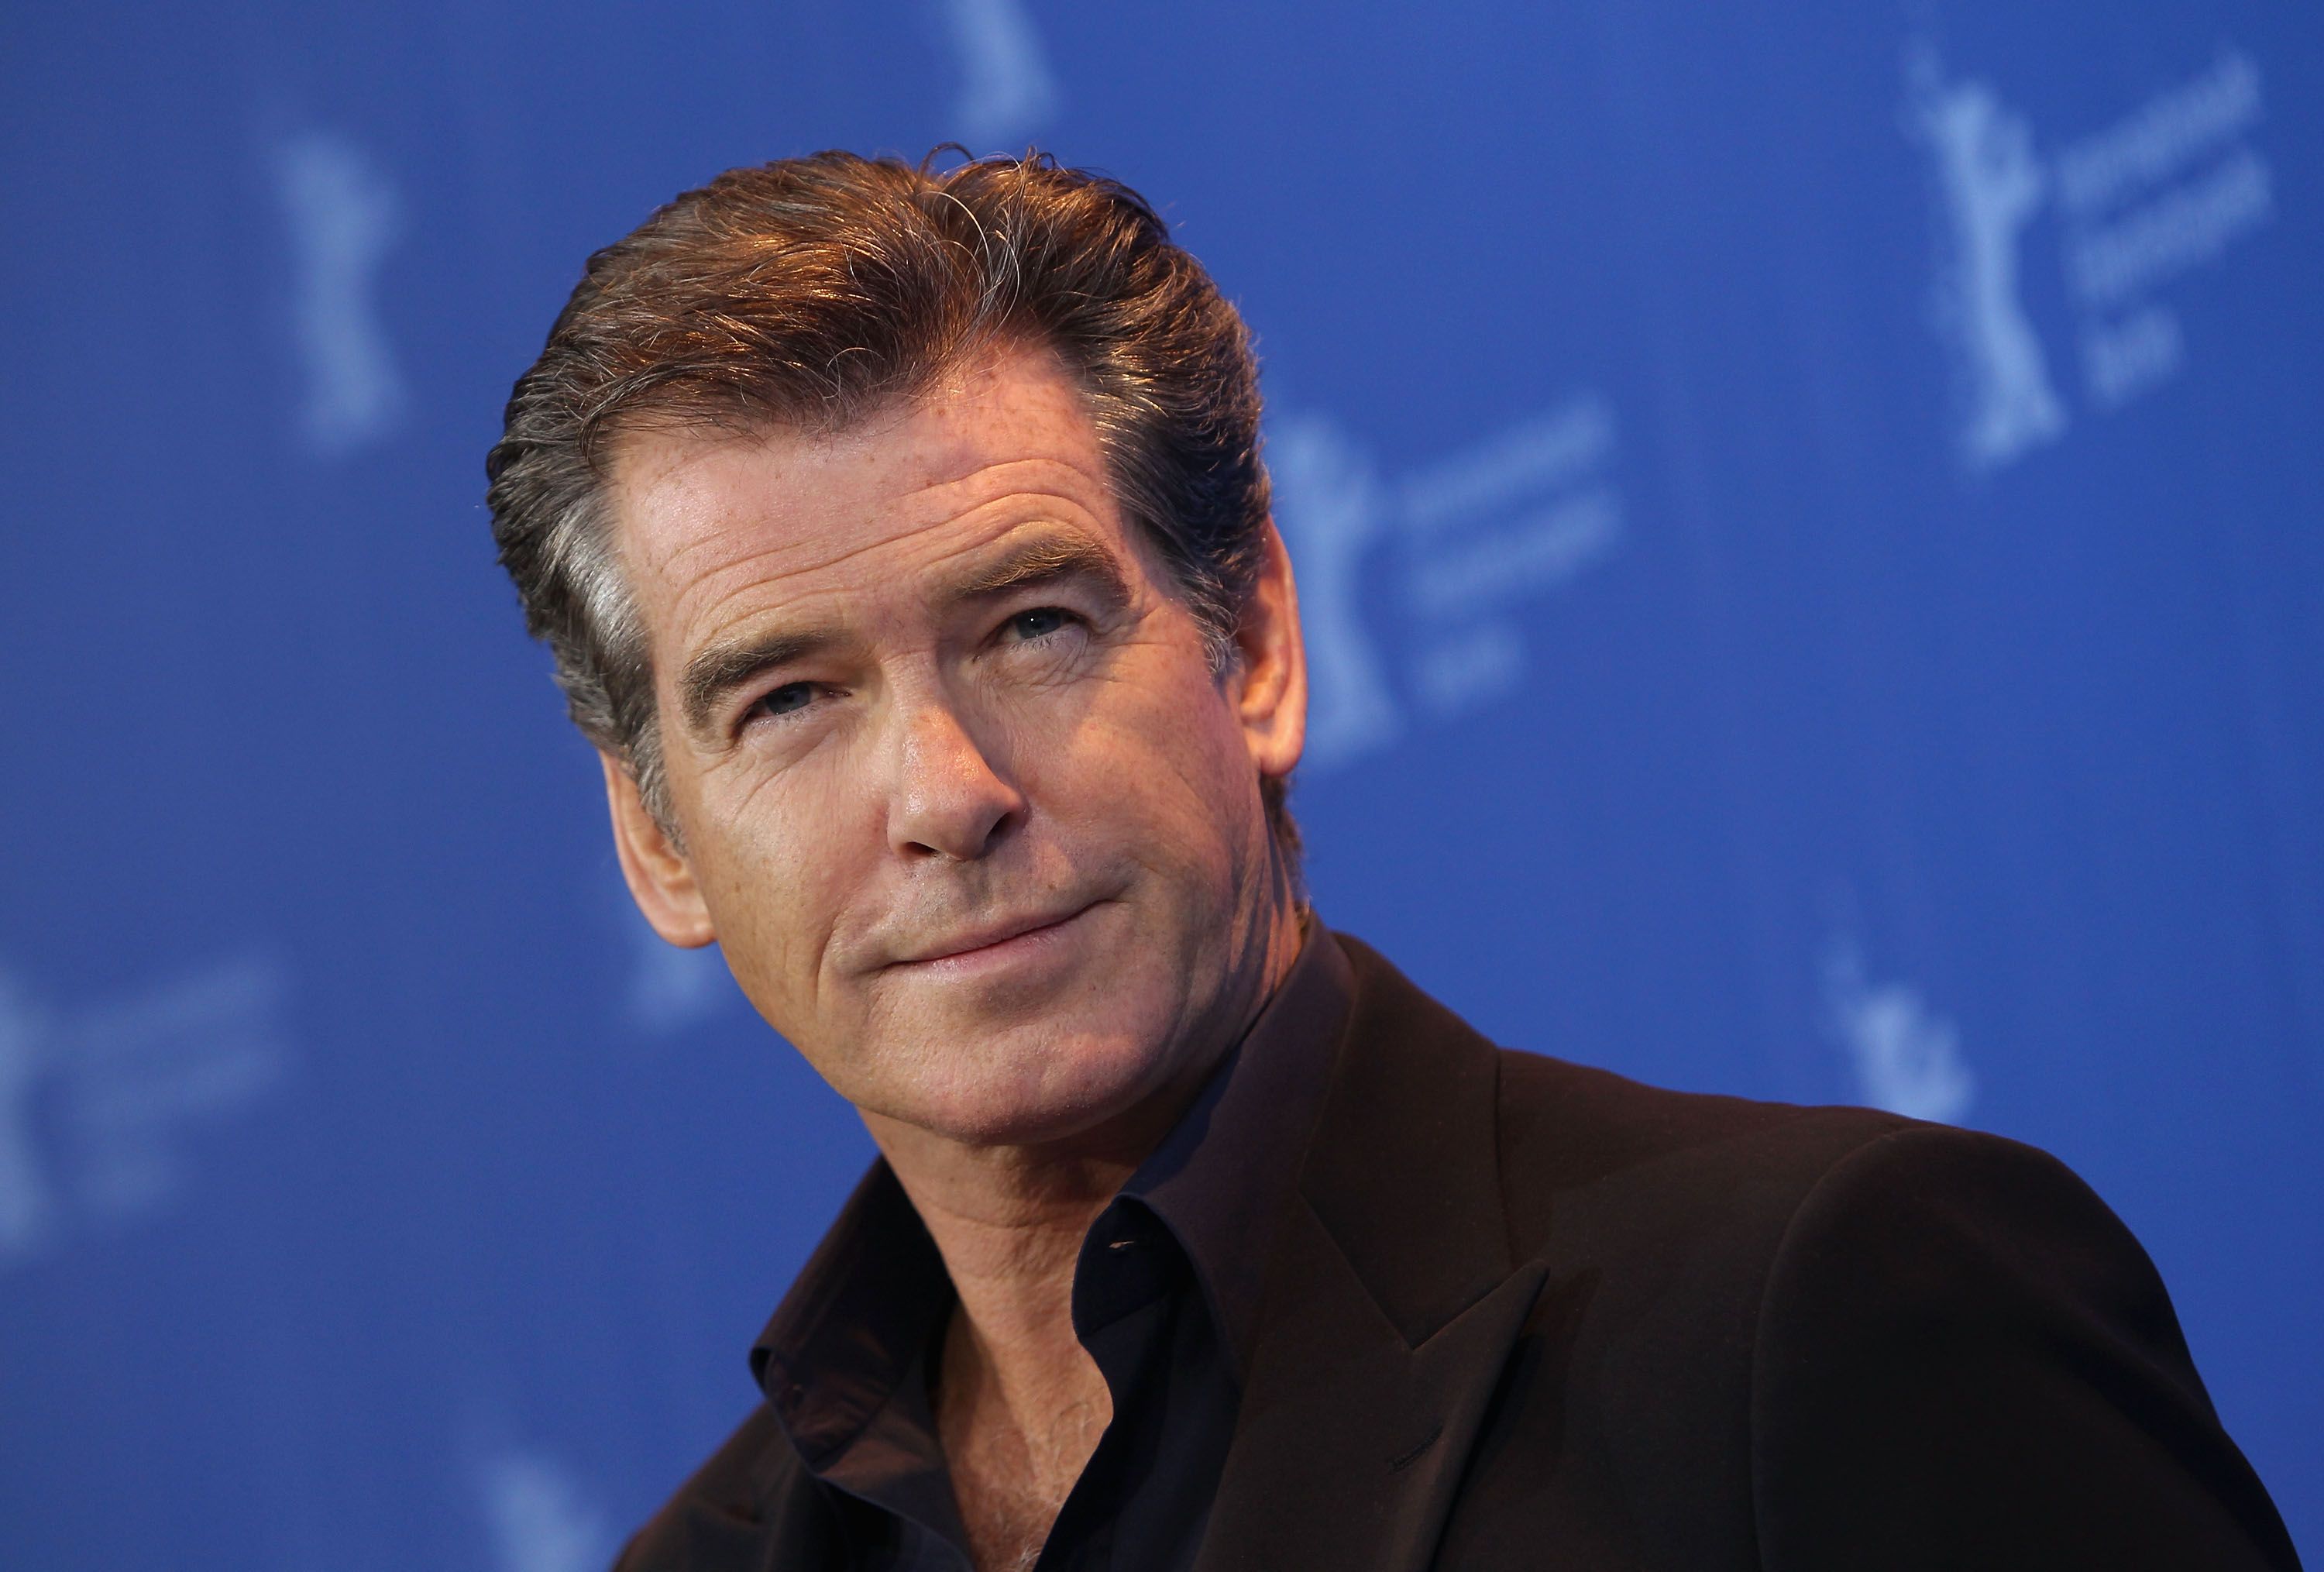 Pierce Brosnan at the 'Ghost Writer' Photocall during day two of the 60th Berlin International Film Festival at the Grand Hyatt Hotel on February 12, 2010 in Berlin, Germany. | Photo: Getty Images